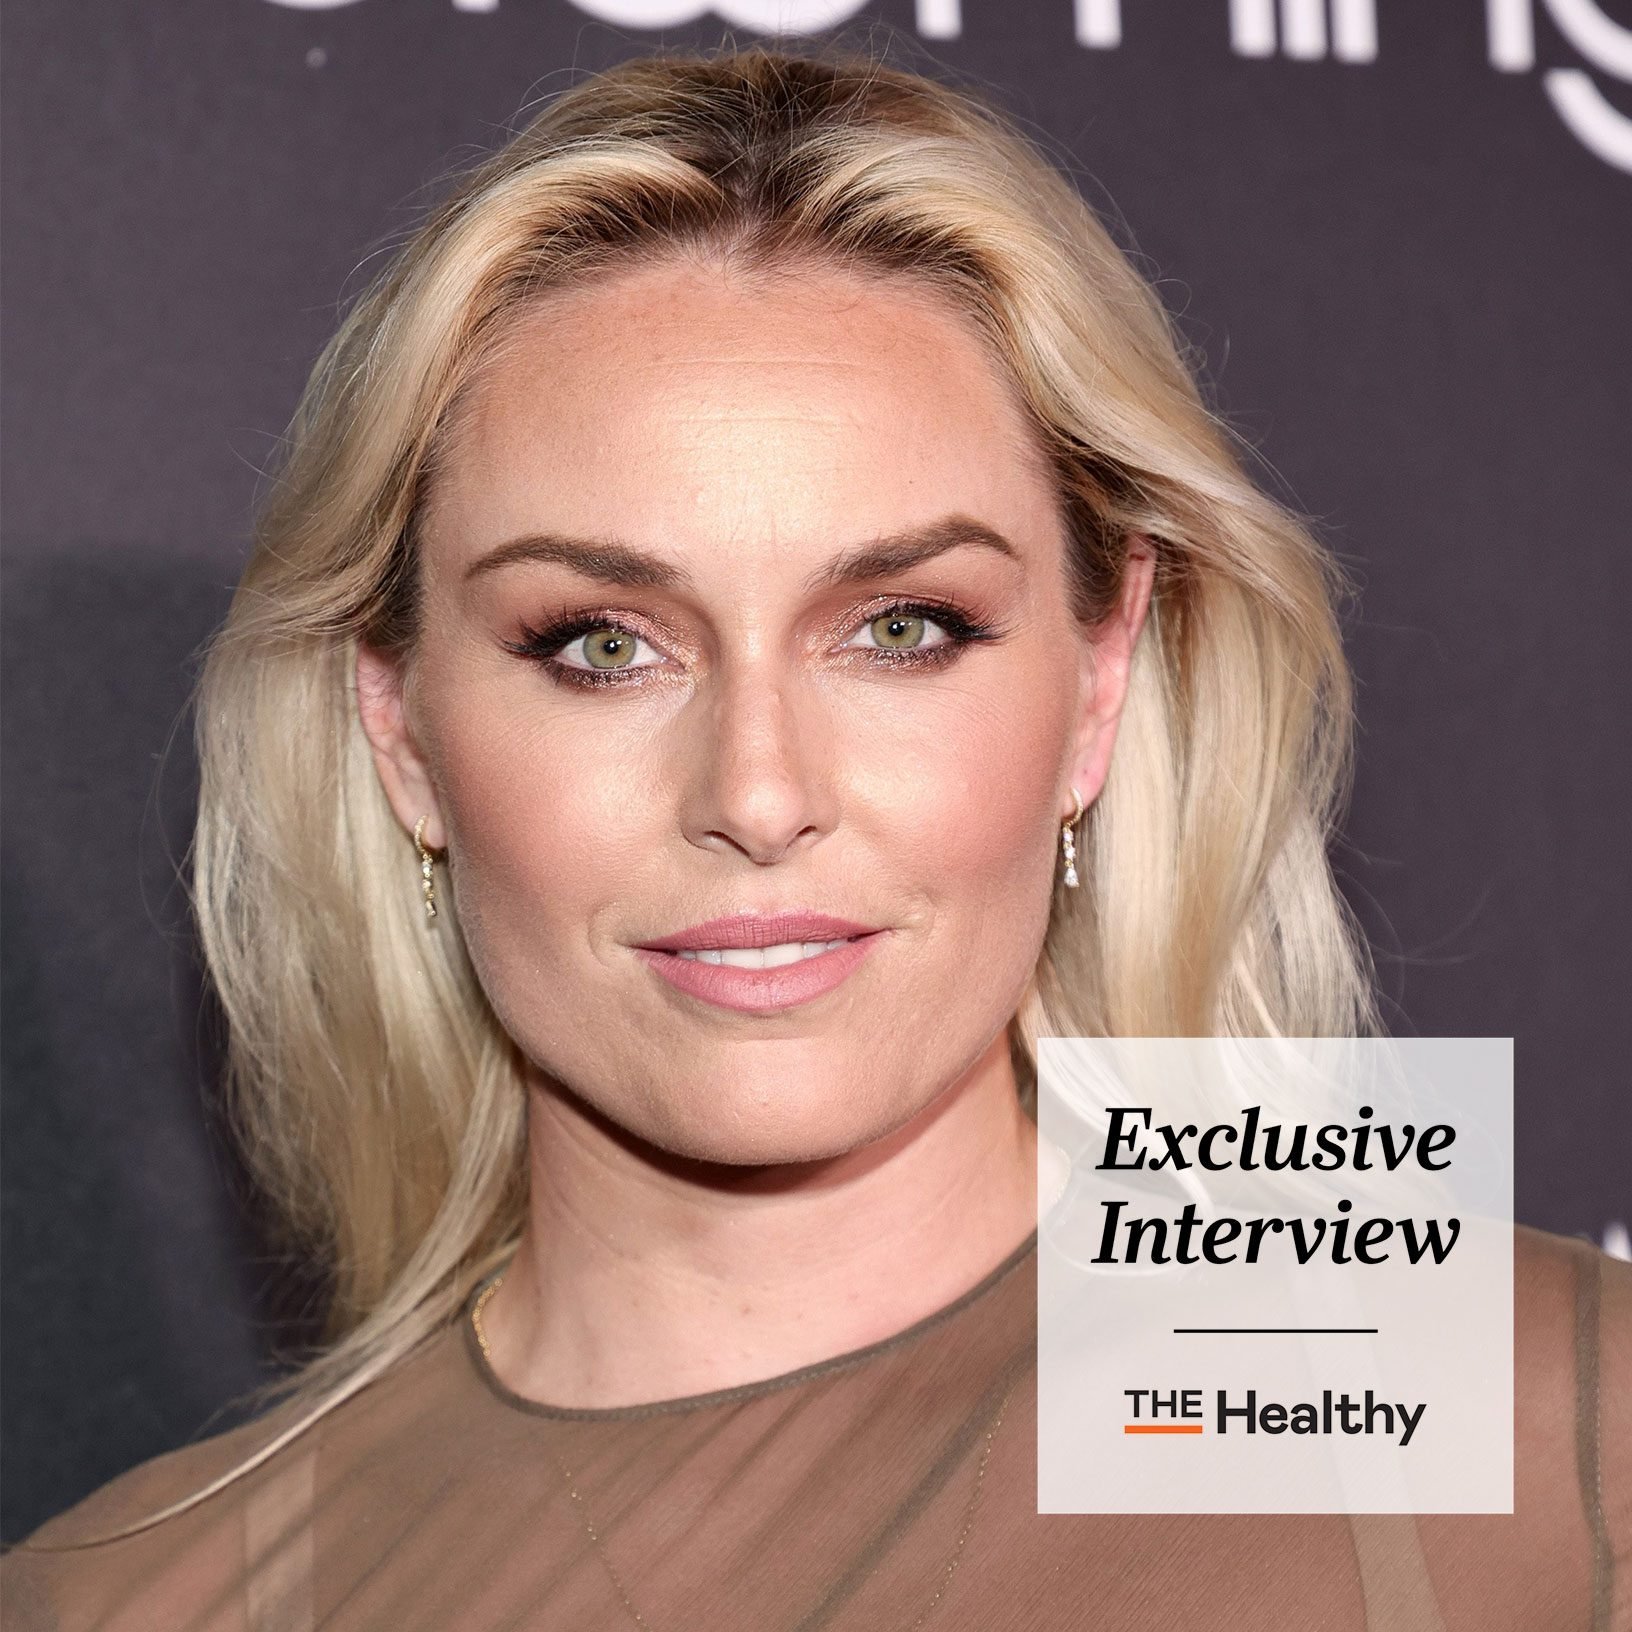 Lindsey Vonn Gets Candid about a 10-Year Health Struggle: "The Stress Made It Even Harder"